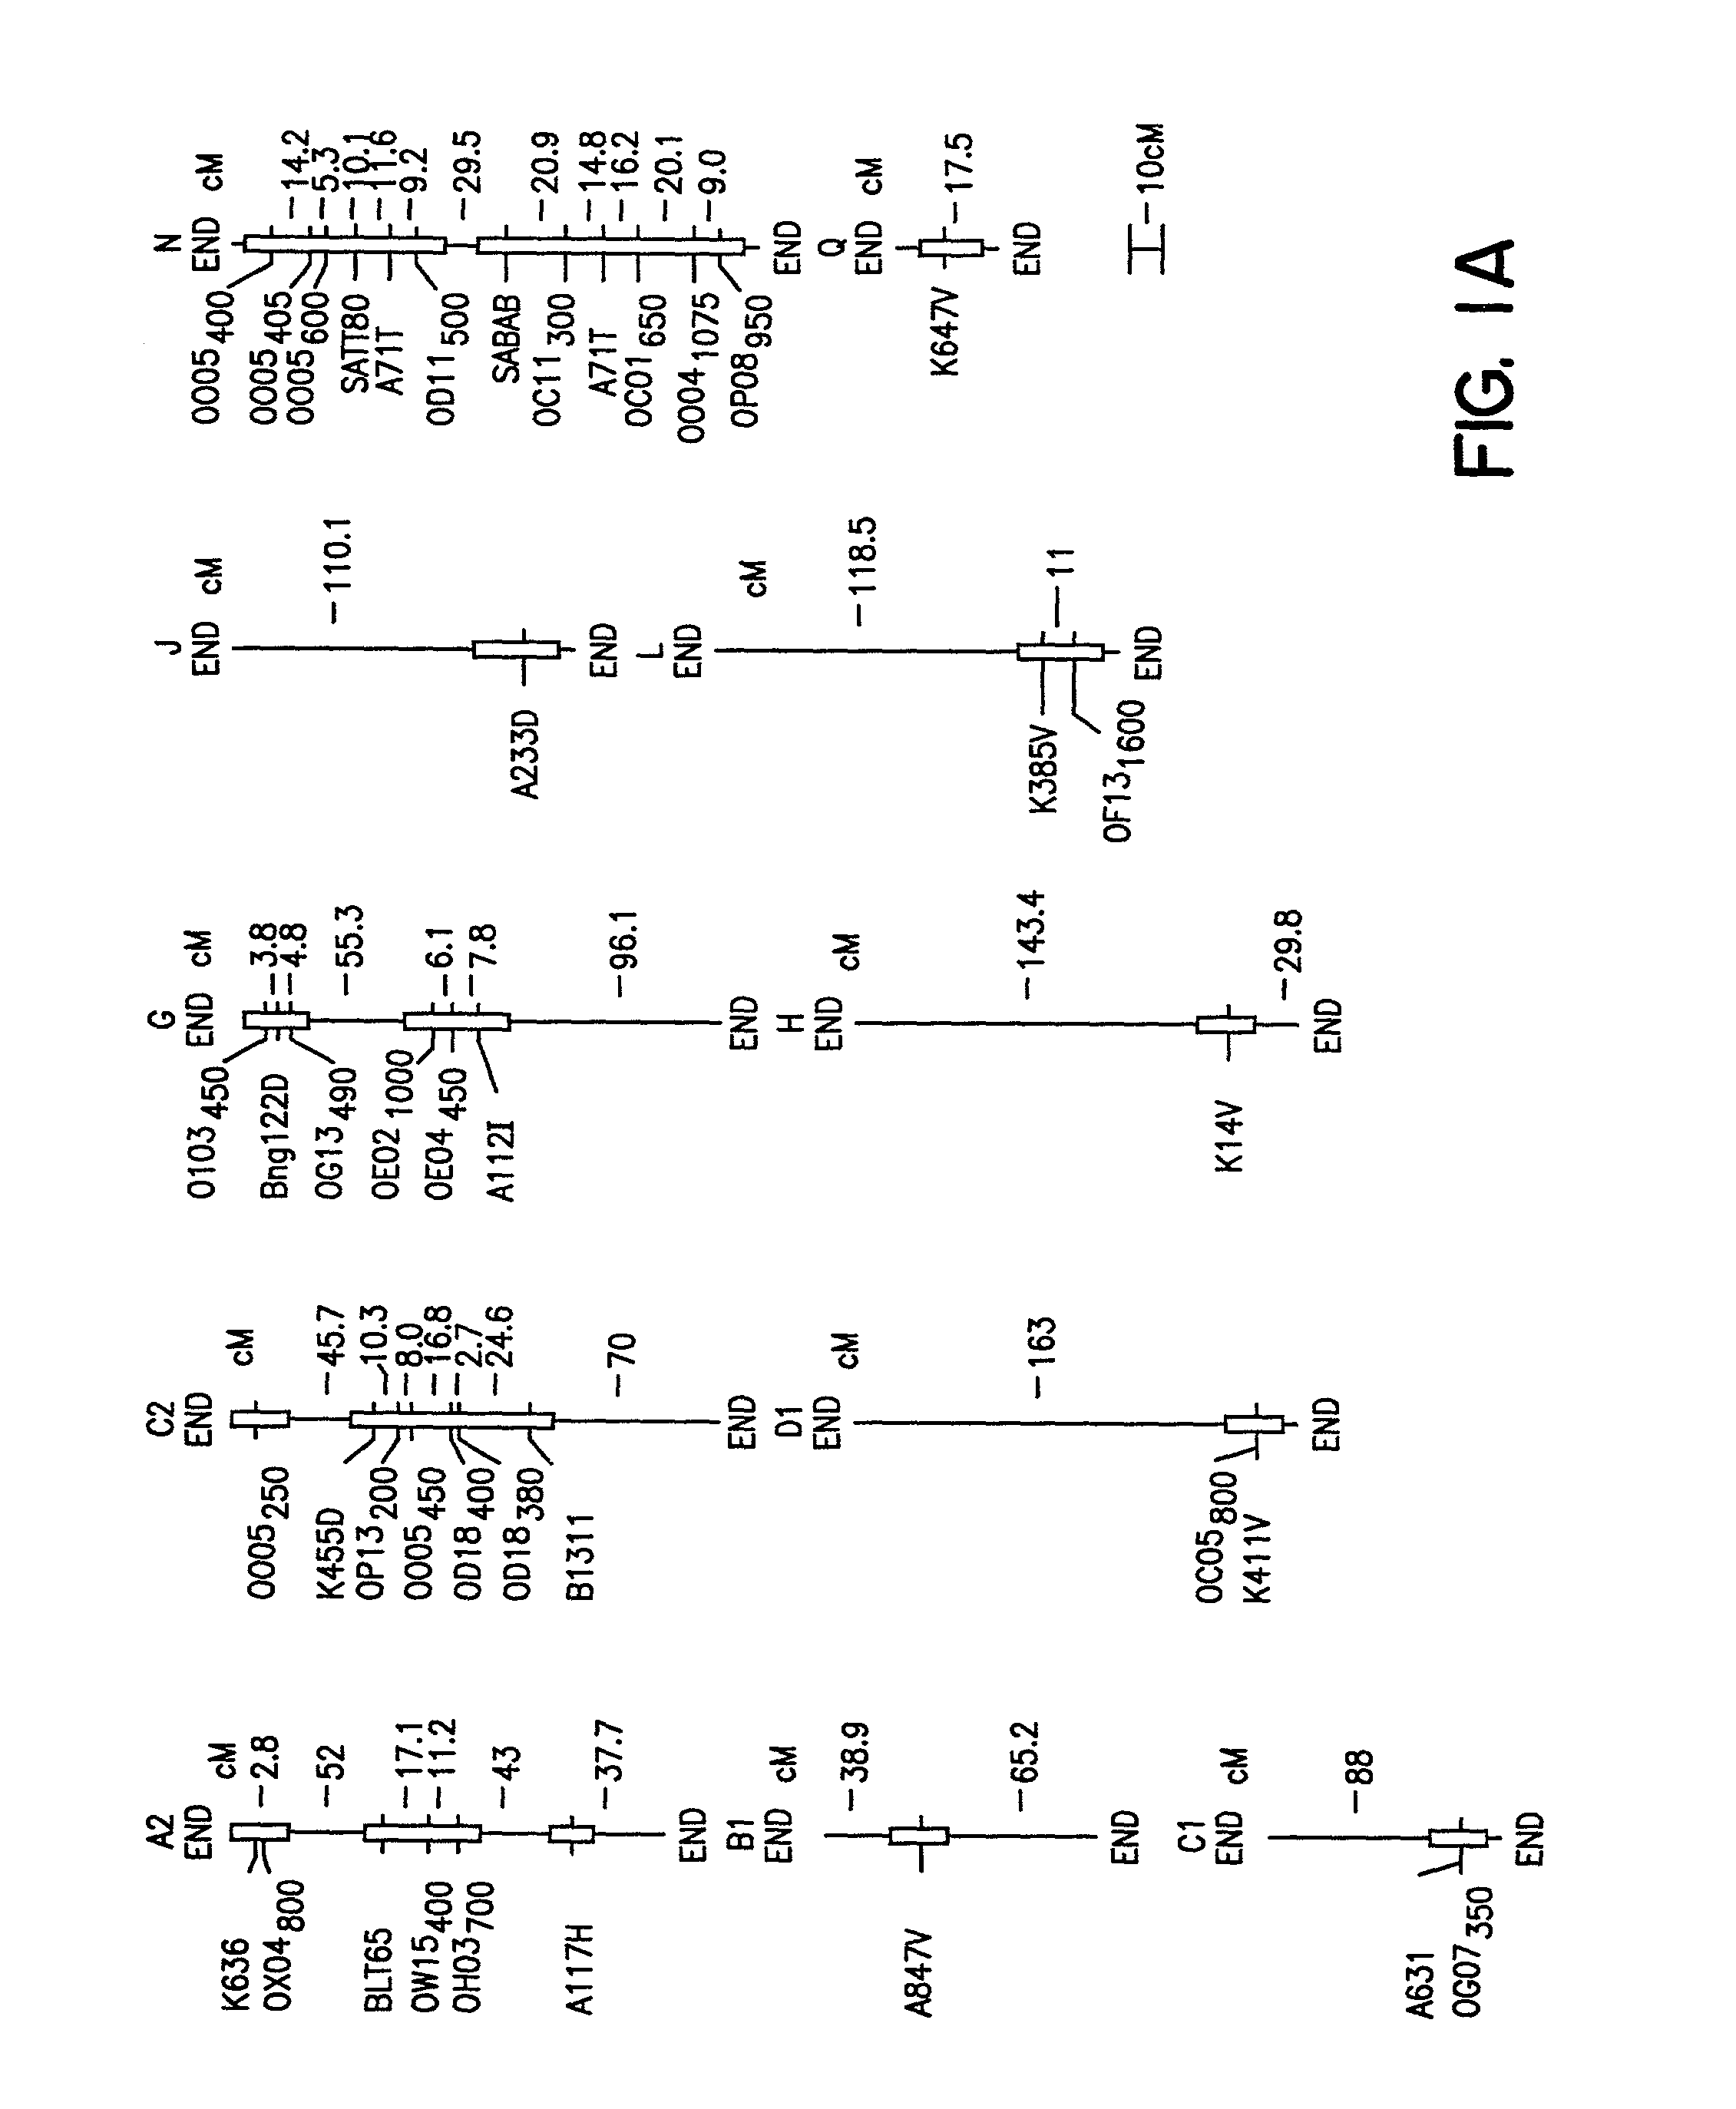 Method of determining soybean sudden death syndrome resistance in a soybean plant